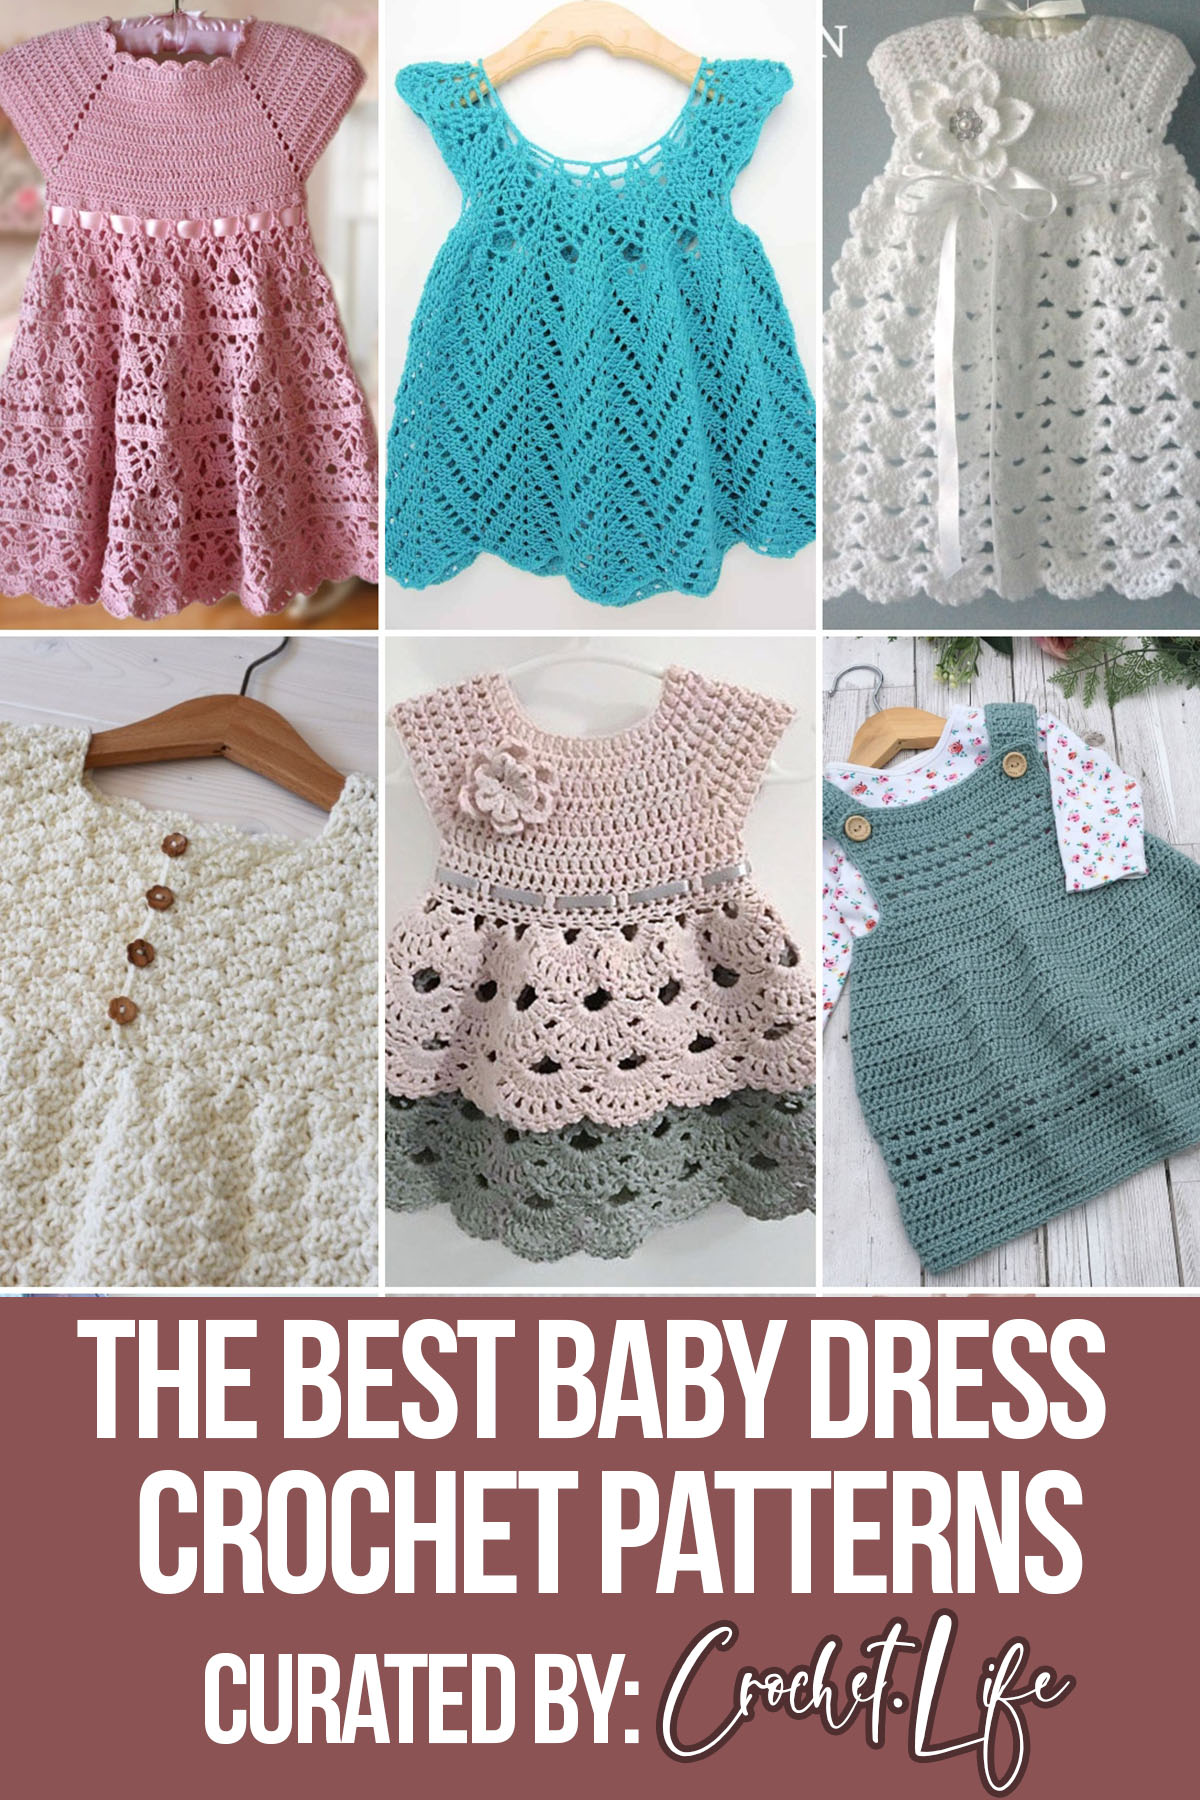 photo collage of crochet patterns for baby dresses with text which reads the best baby dress crochet patterns curated by crochet.life 